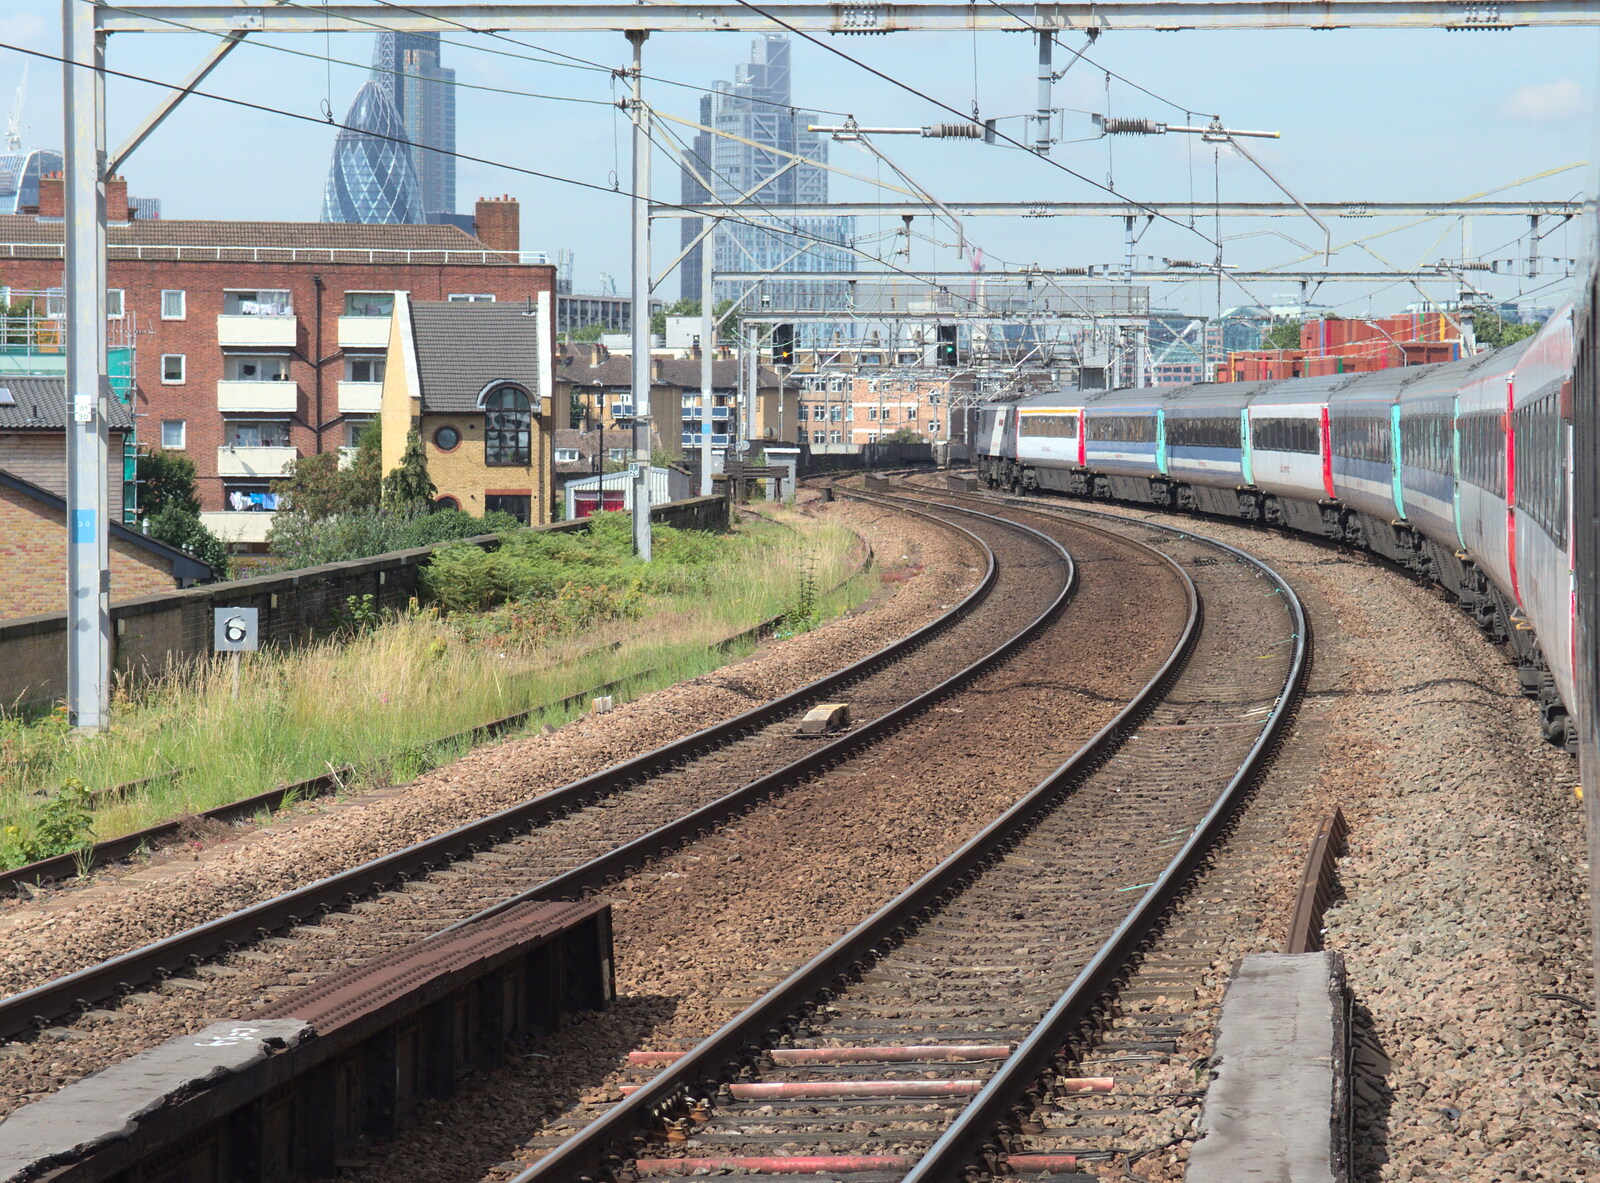 The multi-liveried train snakes into London from A Trip to Pizza Pub, Great Suffolk Street, Southwark - 8th July 2014